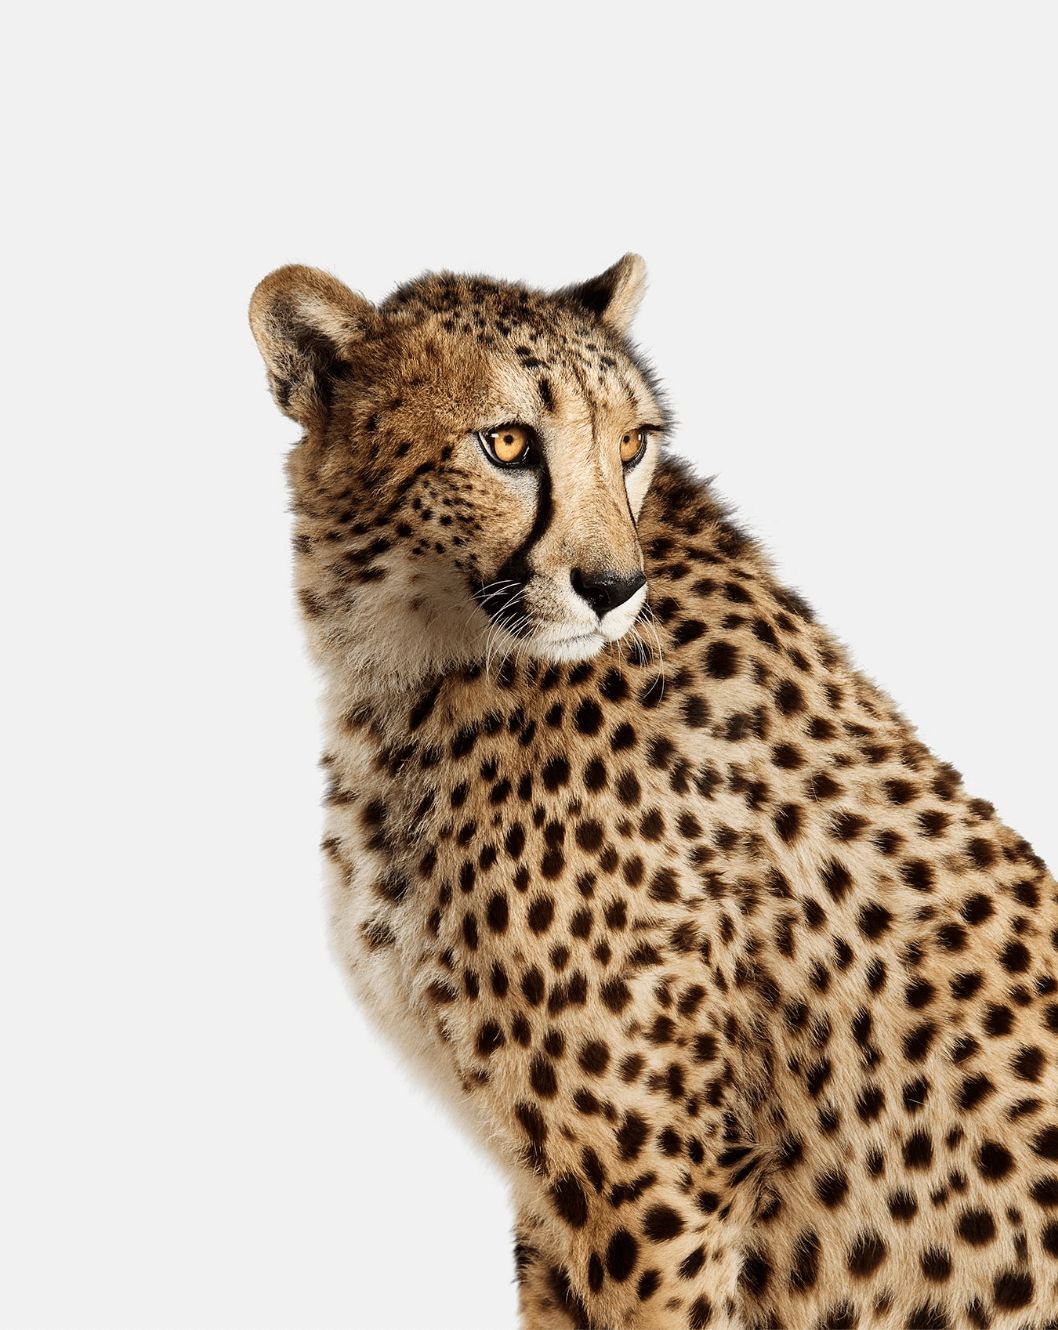 Cheetah with striking eyes and contrasting colors which print beautifully on a ChromaLuxe Metal Print.